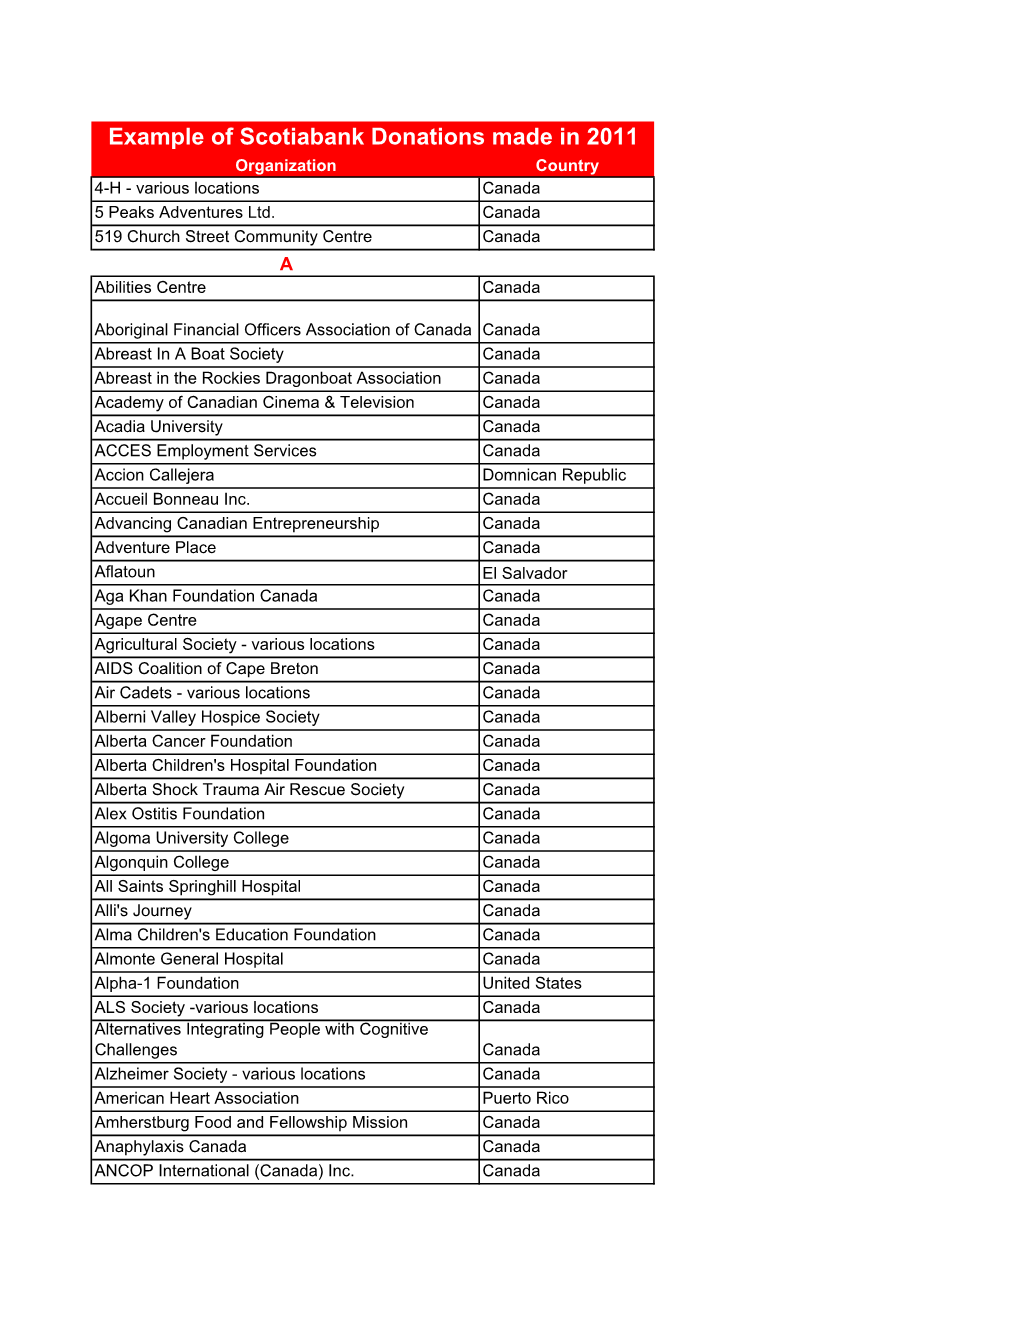 Example of Scotiabank Donations Made in 2011 Organization Country 4-H - Various Locations Canada 5 Peaks Adventures Ltd